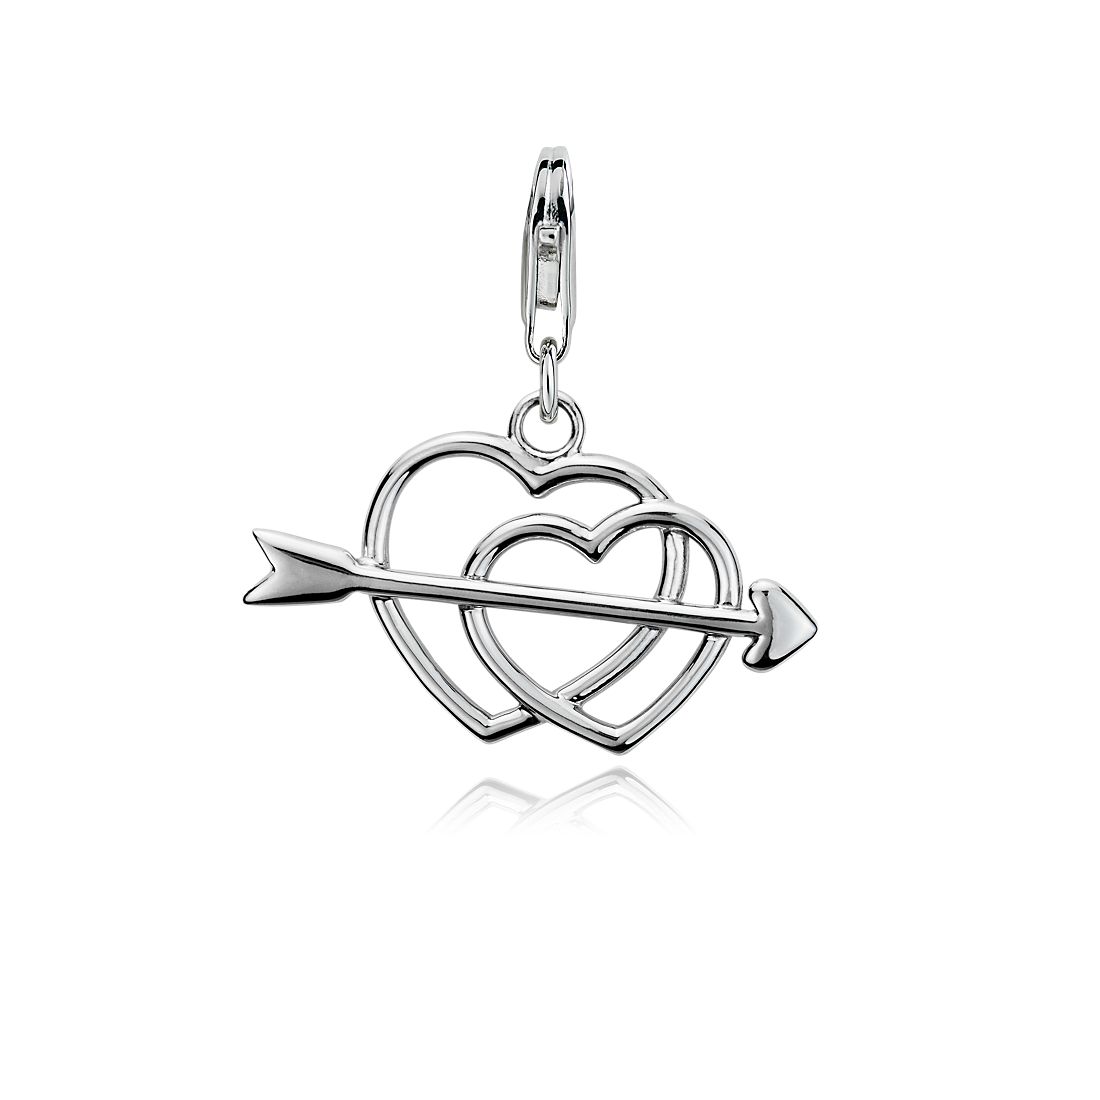 Hearts and Arrow Charm in Sterling Silver | Blue Nile